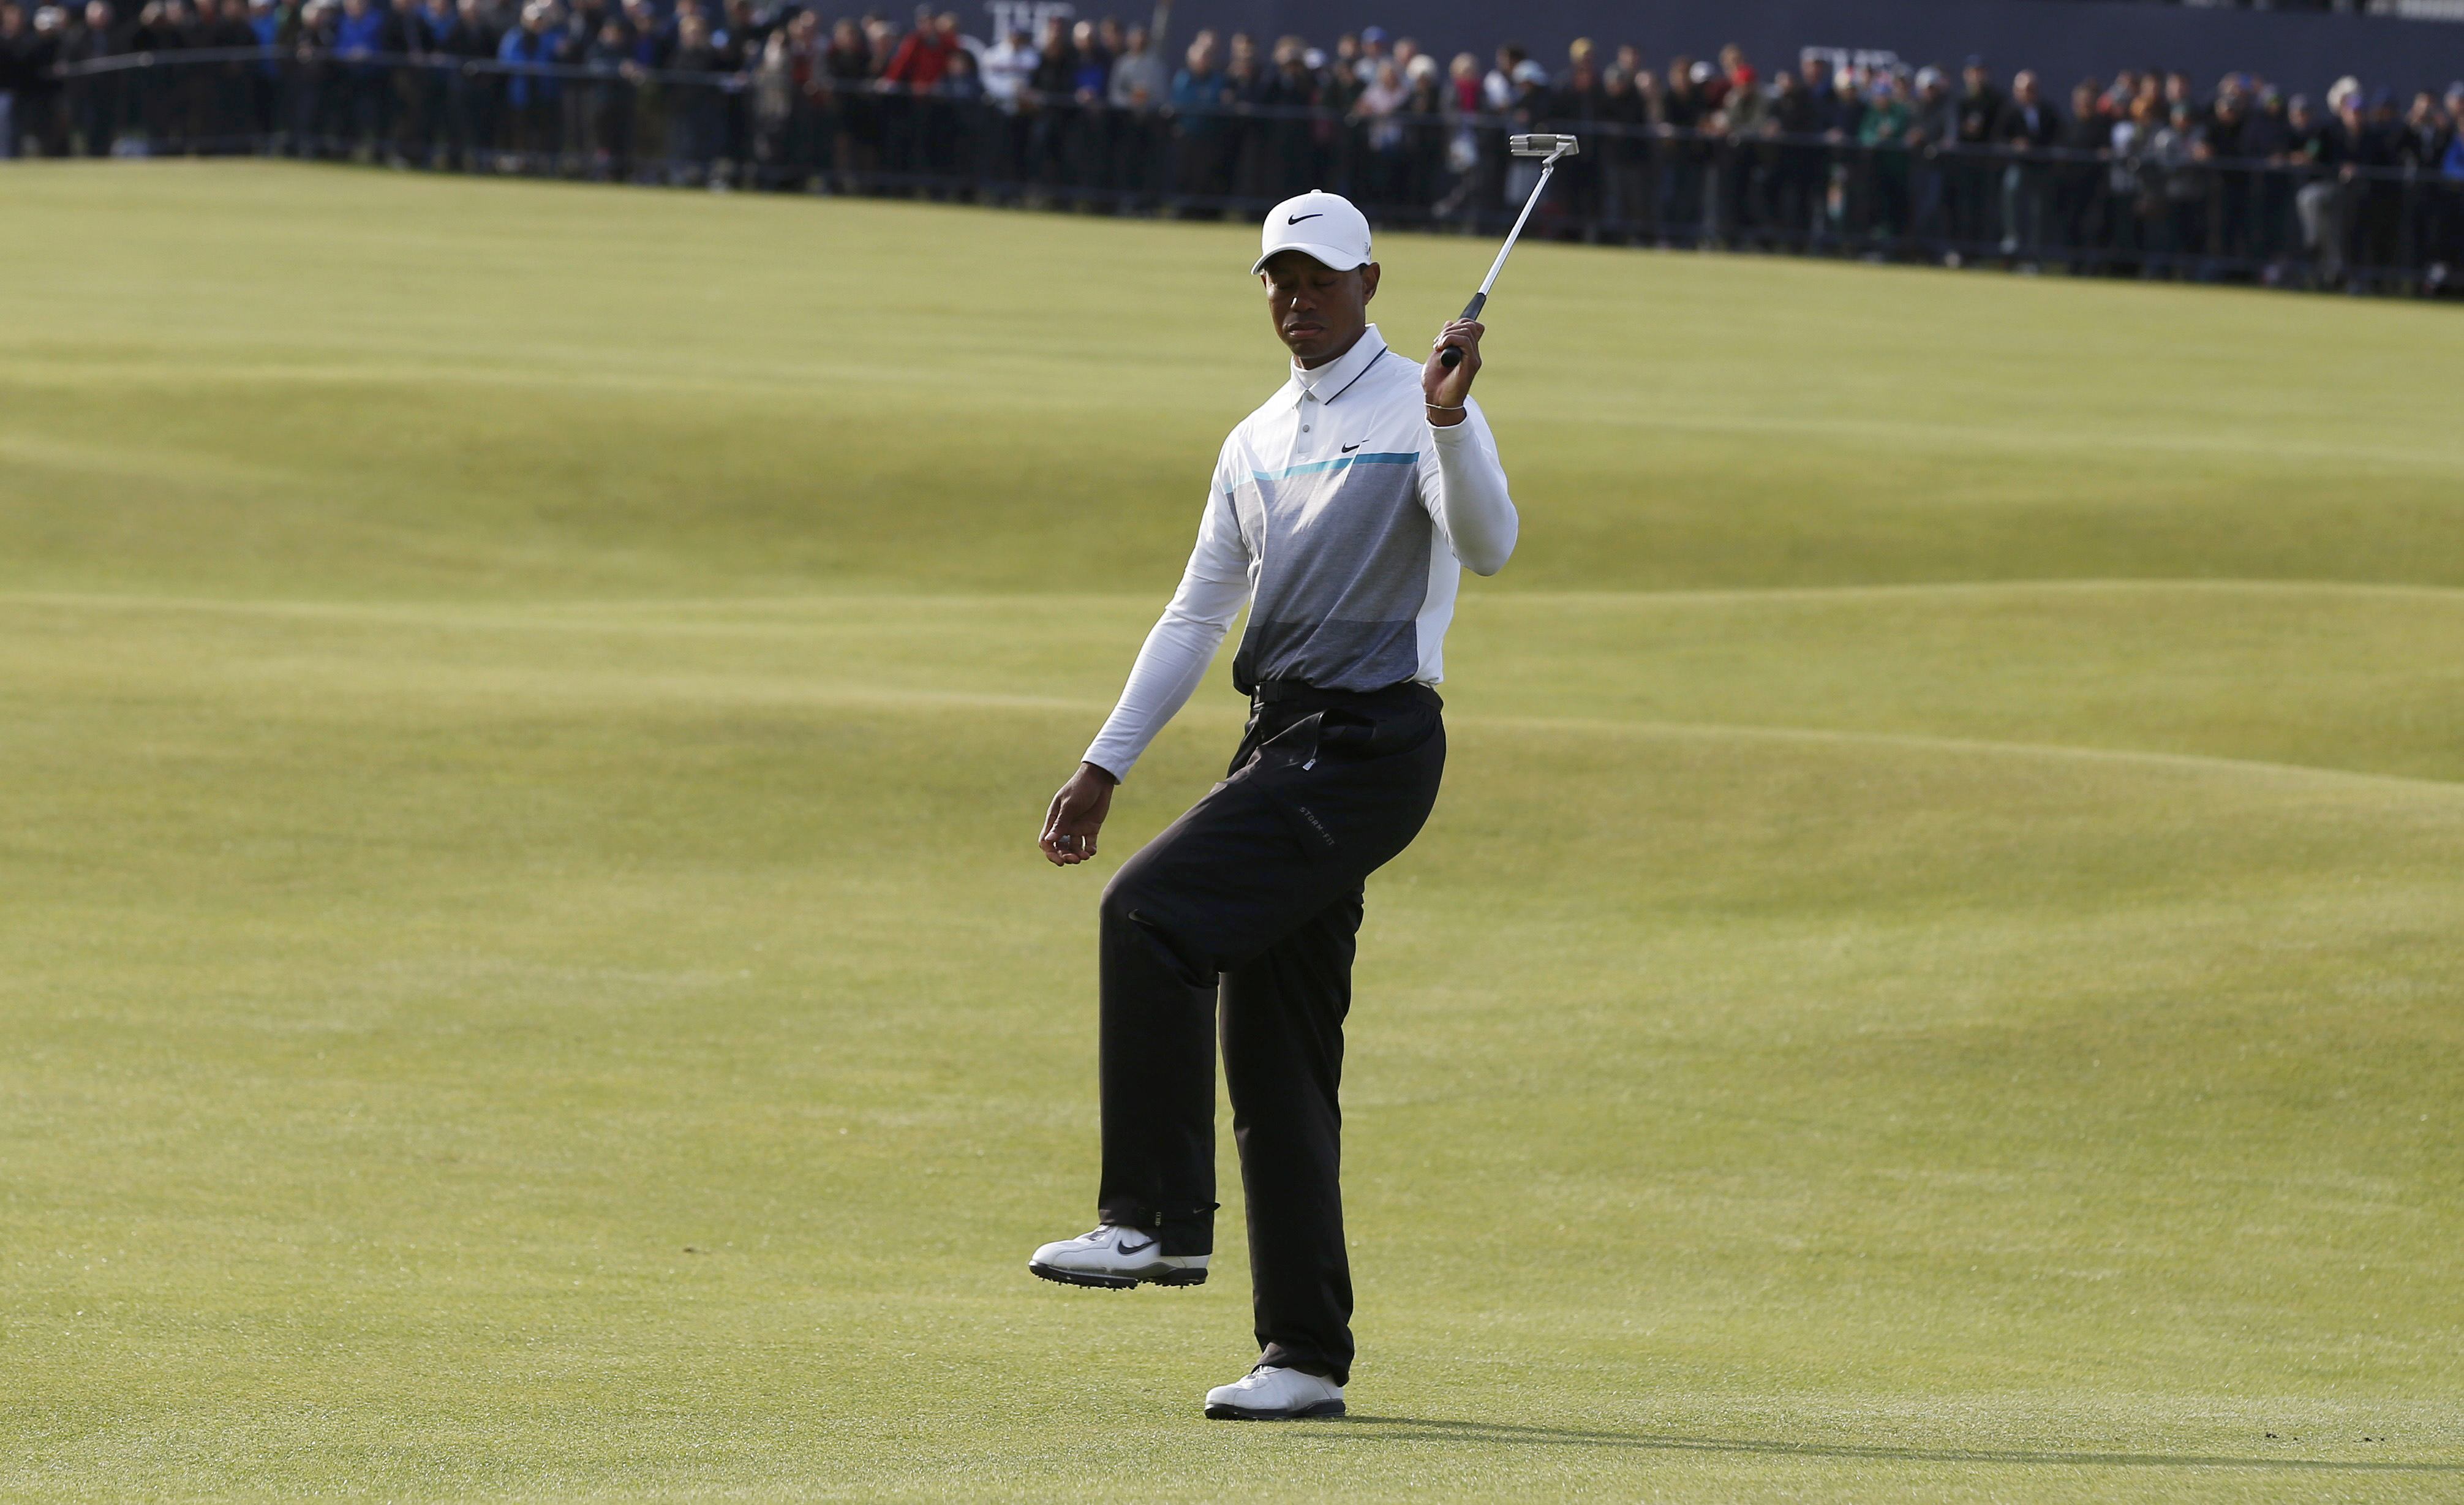 Tiger Woods reacts after a missed putt on the 18th green. (REUTERS)